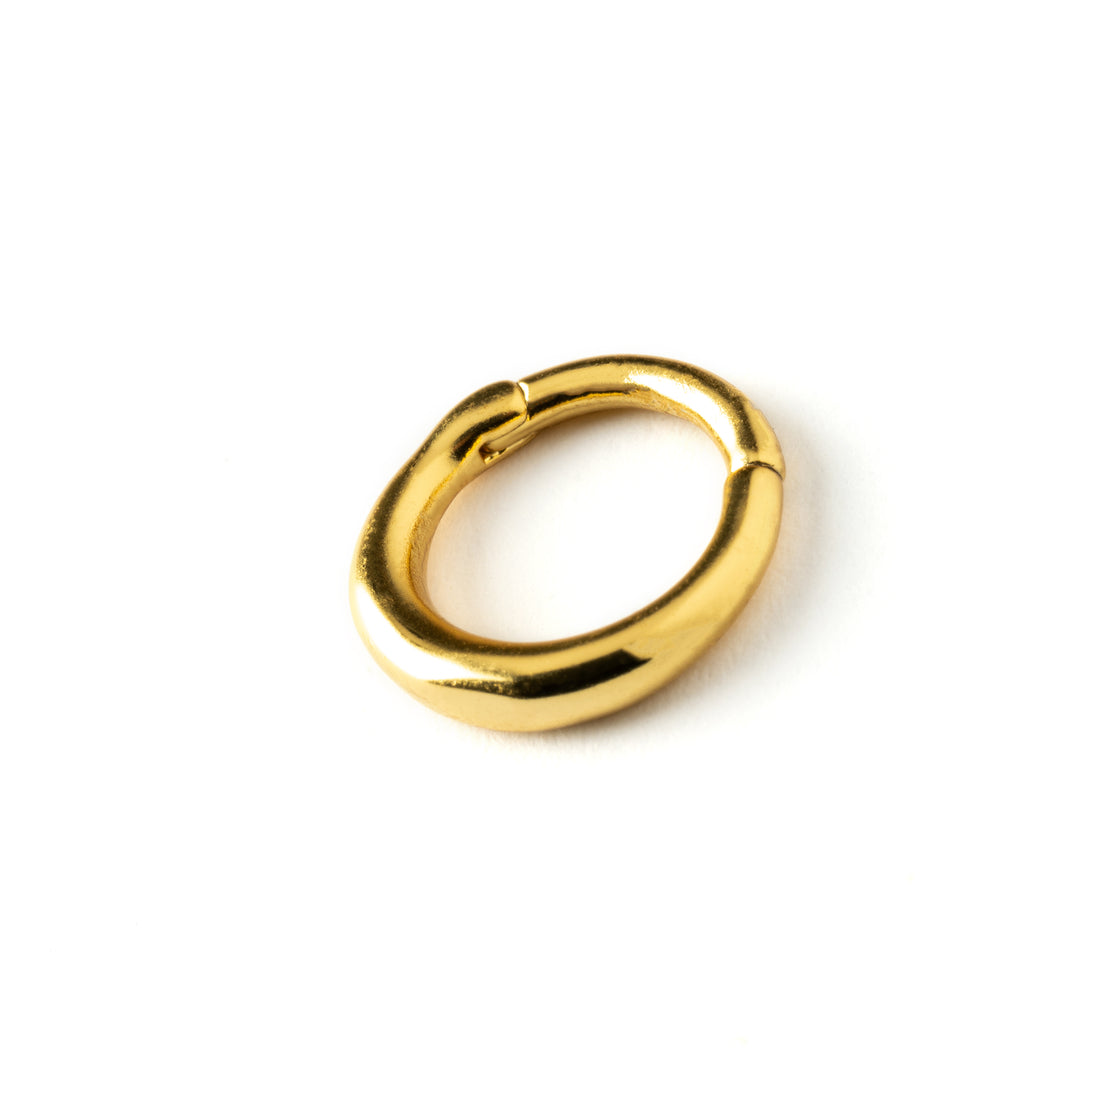 Raja gold surgical steel septum clicker ring right side view